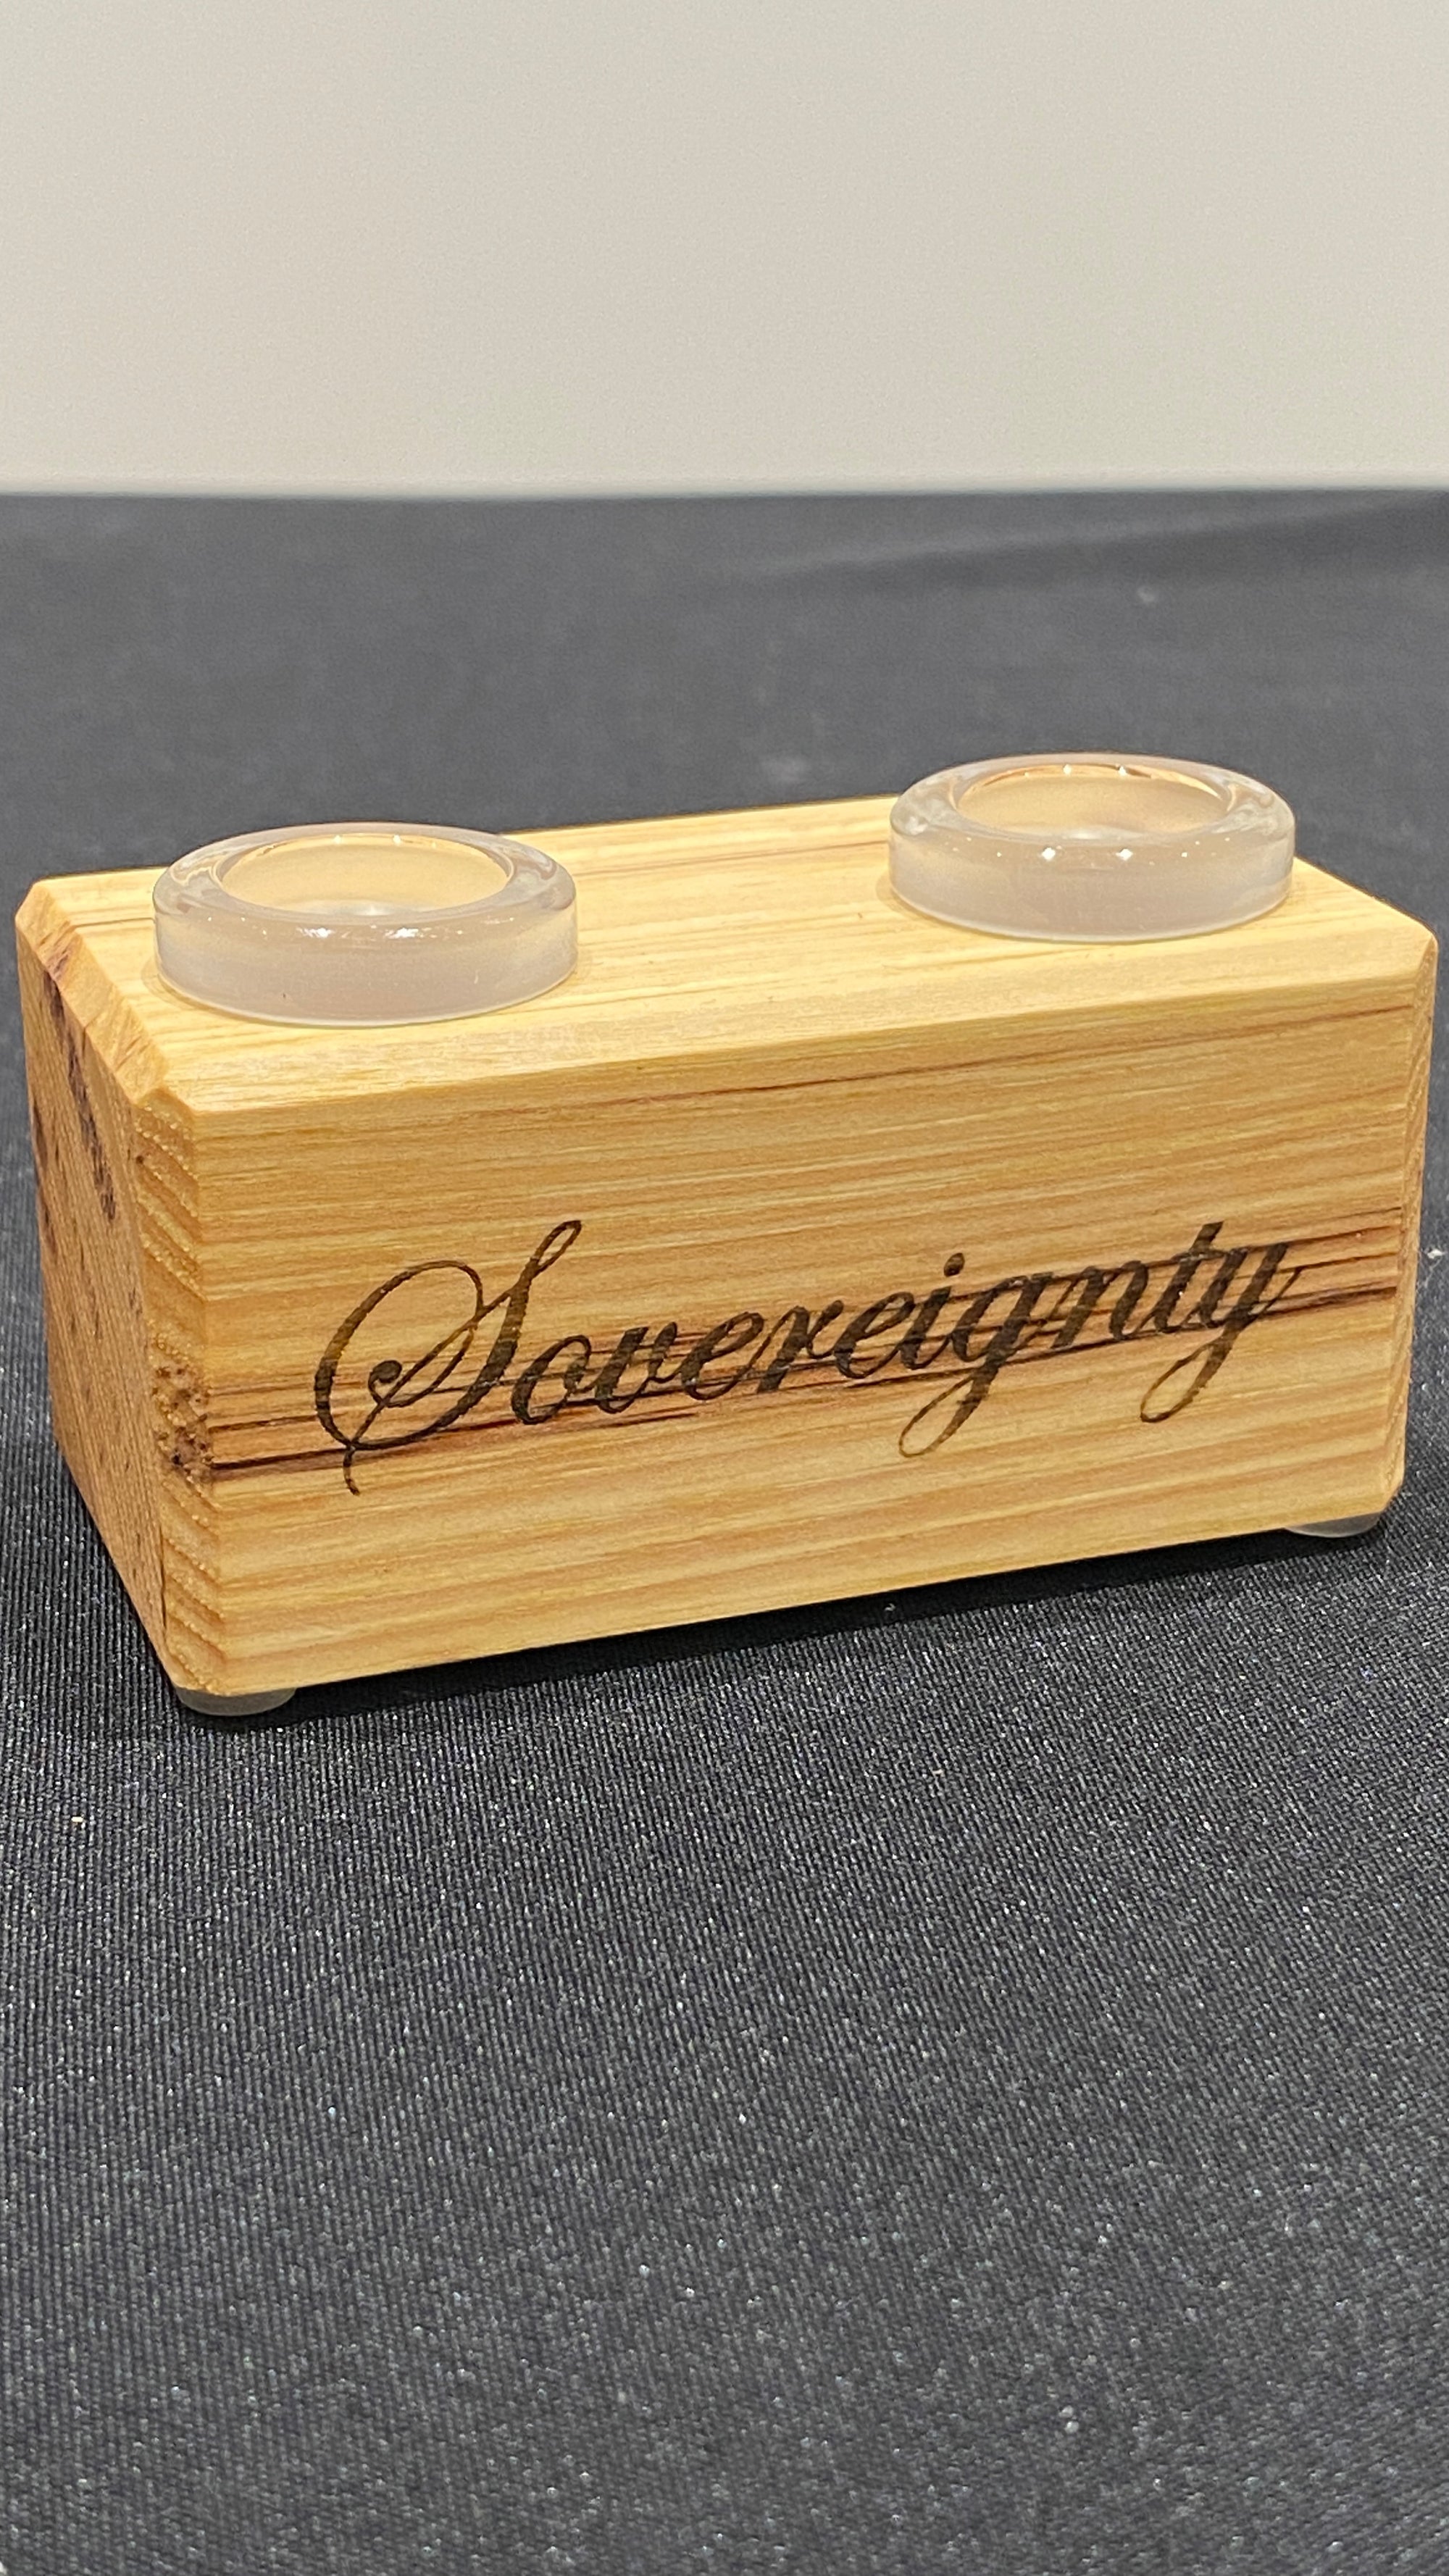 Sovereignty Glass Slide stand - 2 hole